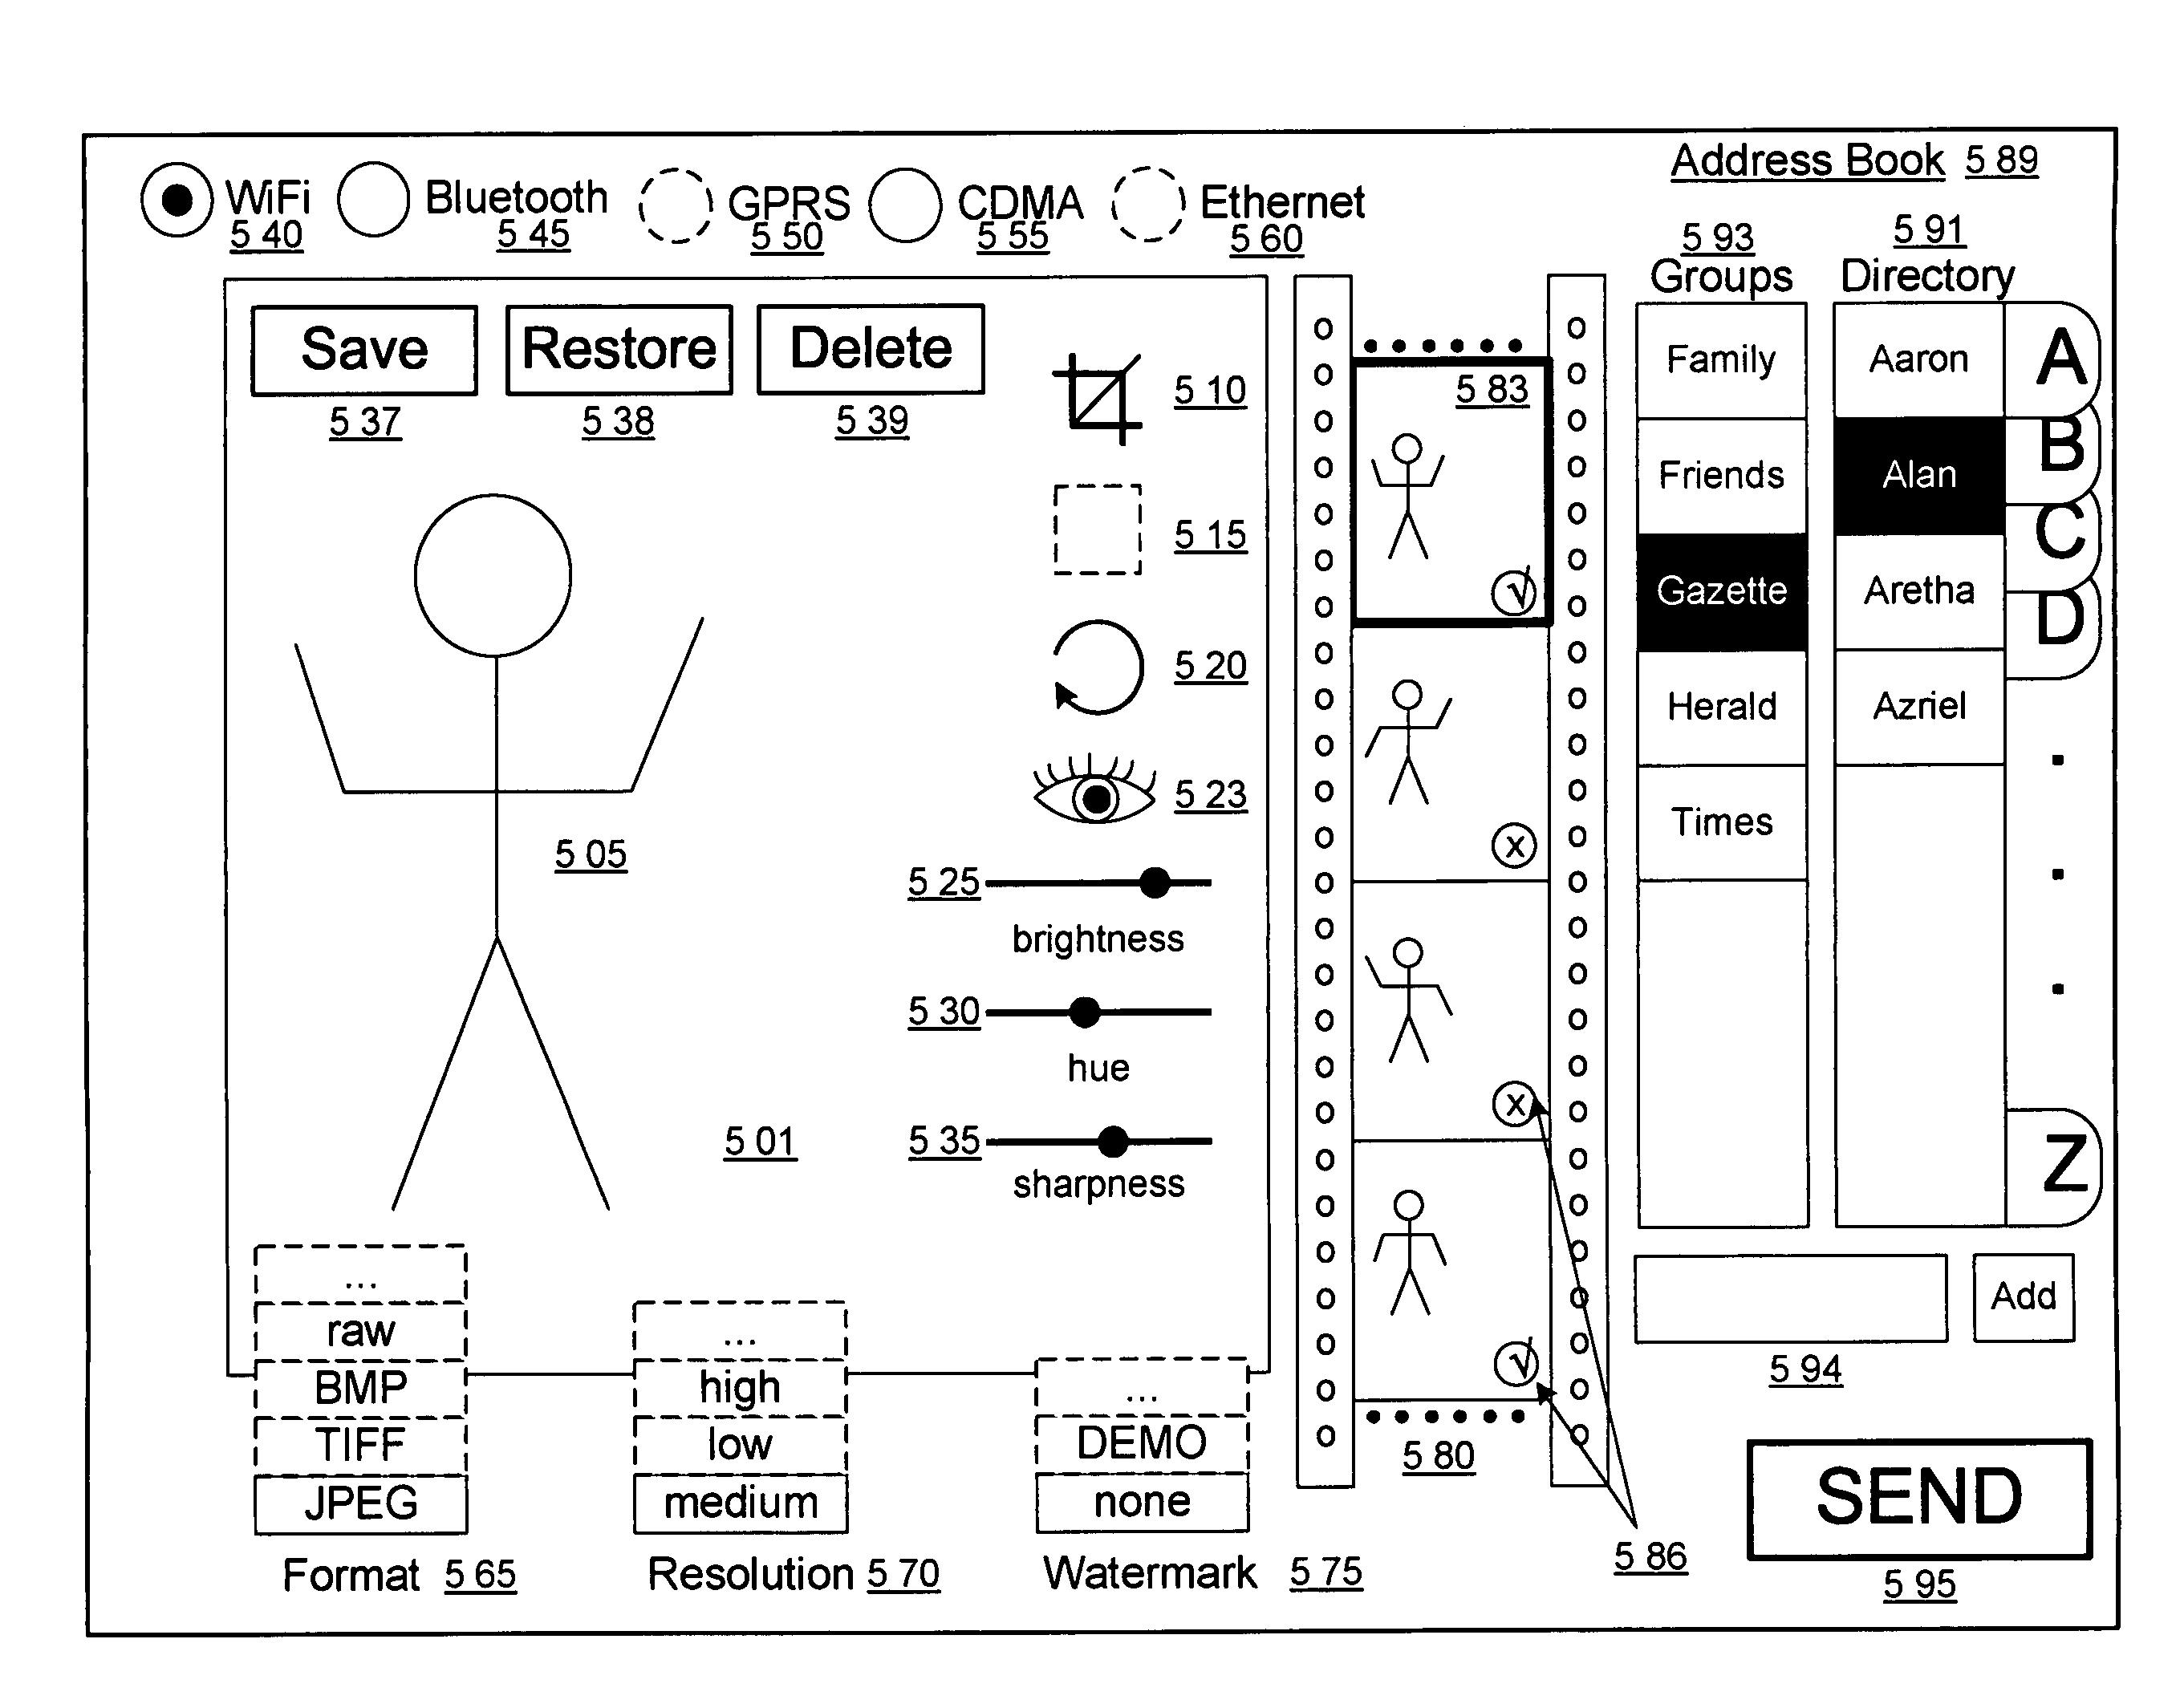 User interface for a portable, image-processing transmitter